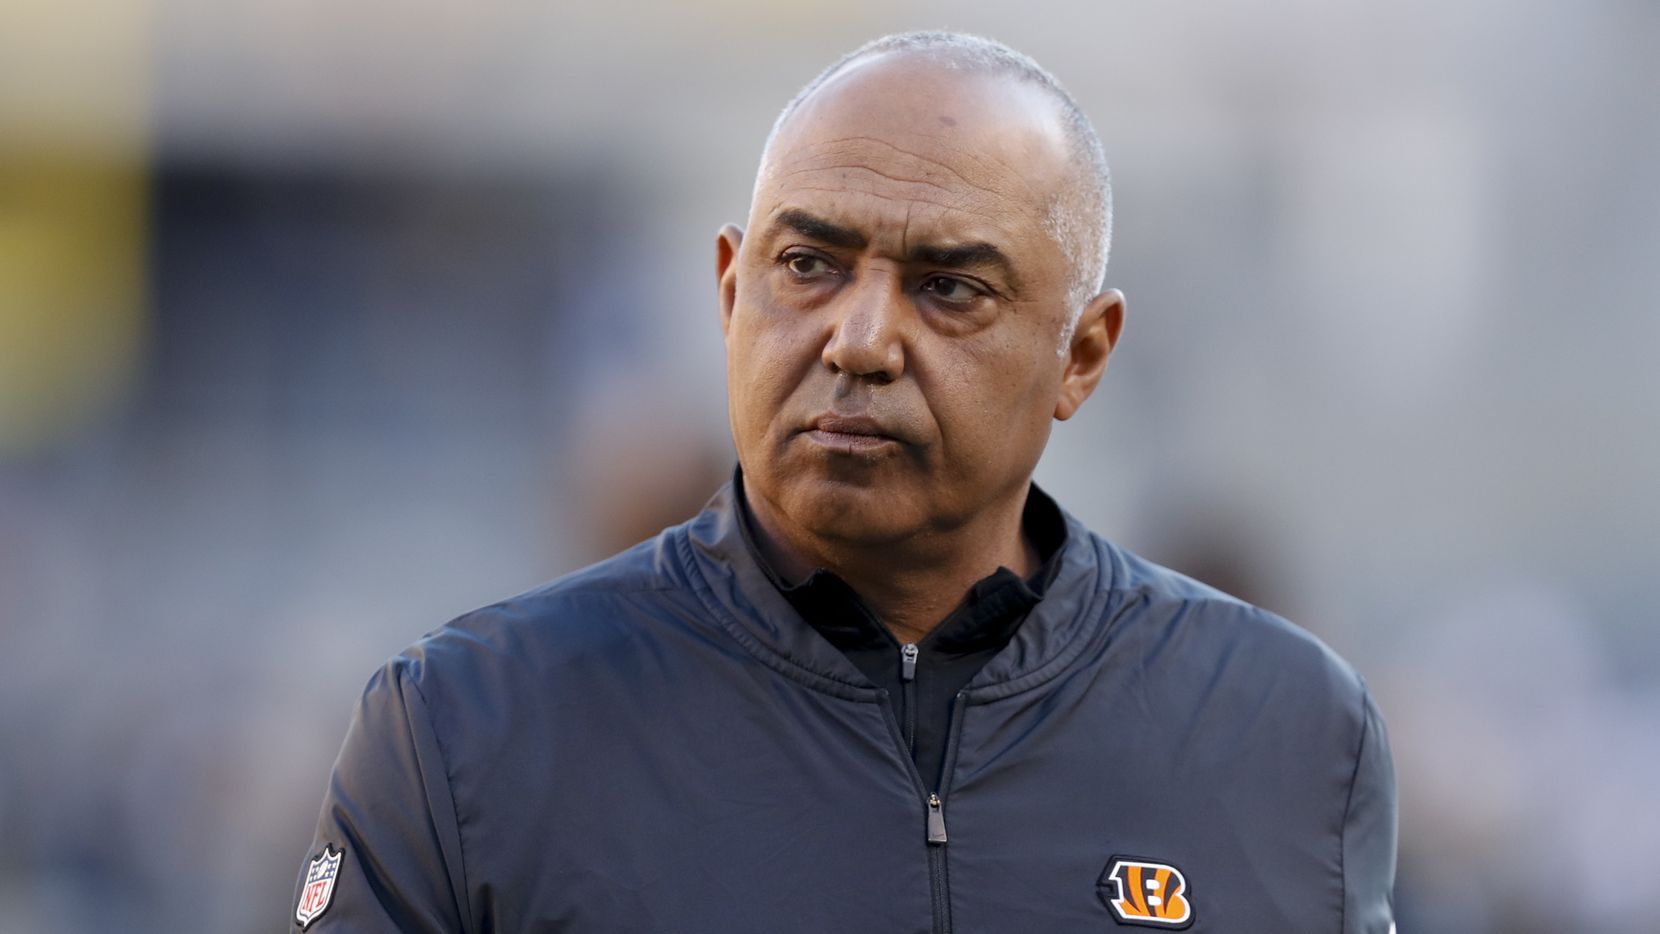 Cincinnati Bengals head coach Marvin Lewis before an NFL football game against the Pittsburgh Steelers, Sunday, Dec. 30, 2018, in Pittsburgh. (AP Photo/Don Wright)